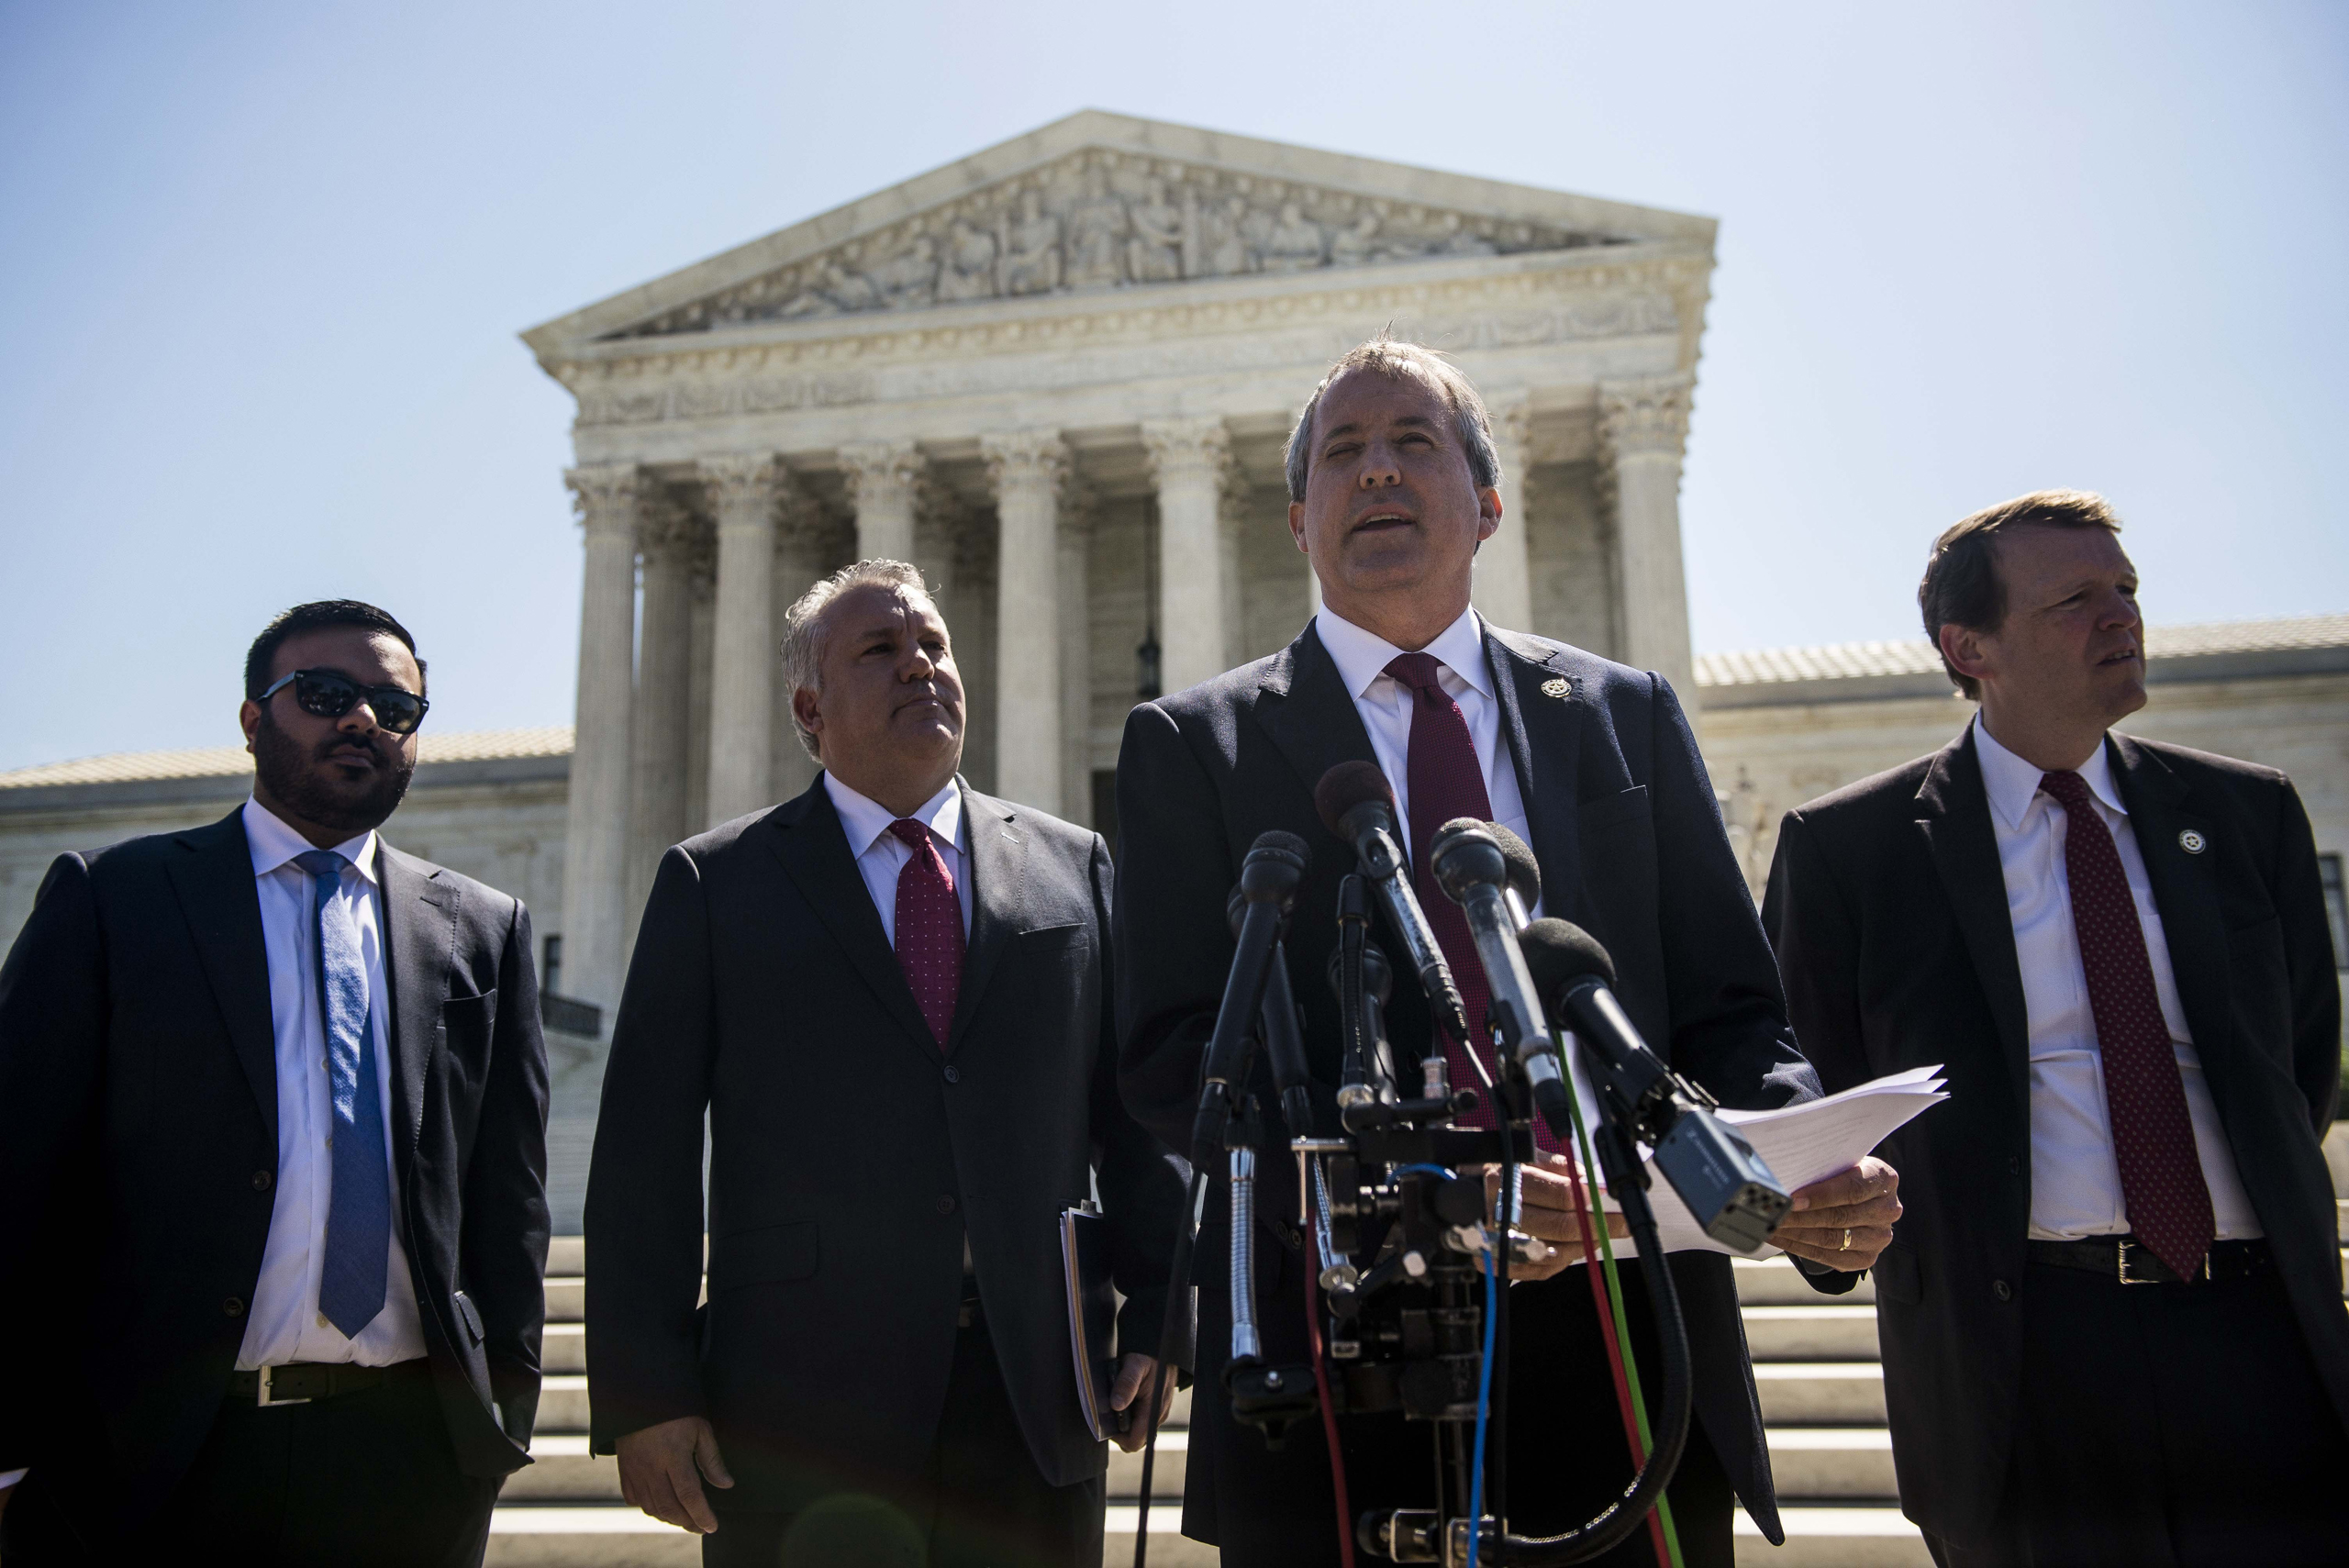 Texas Attorney General Ken Paxton speaks to reporters at a news conference outside the Supreme Court on Capitol Hill in Washington D.C. on June 9, 2016. (Gabriella Demczuk—Getty Images)